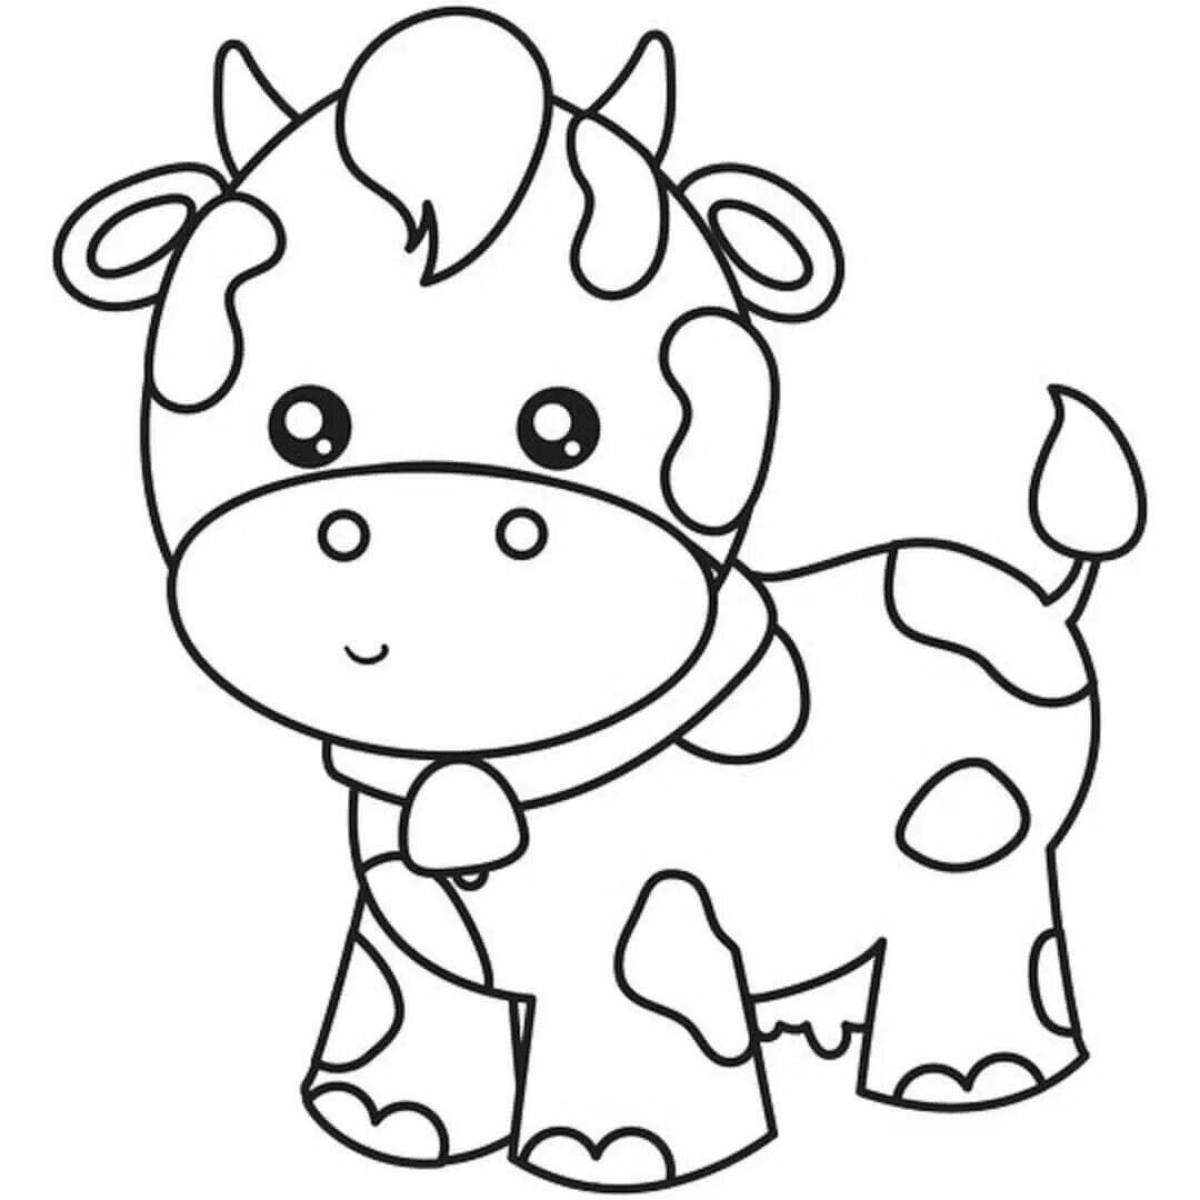 Coloring book playful cow for children 4-5 years old